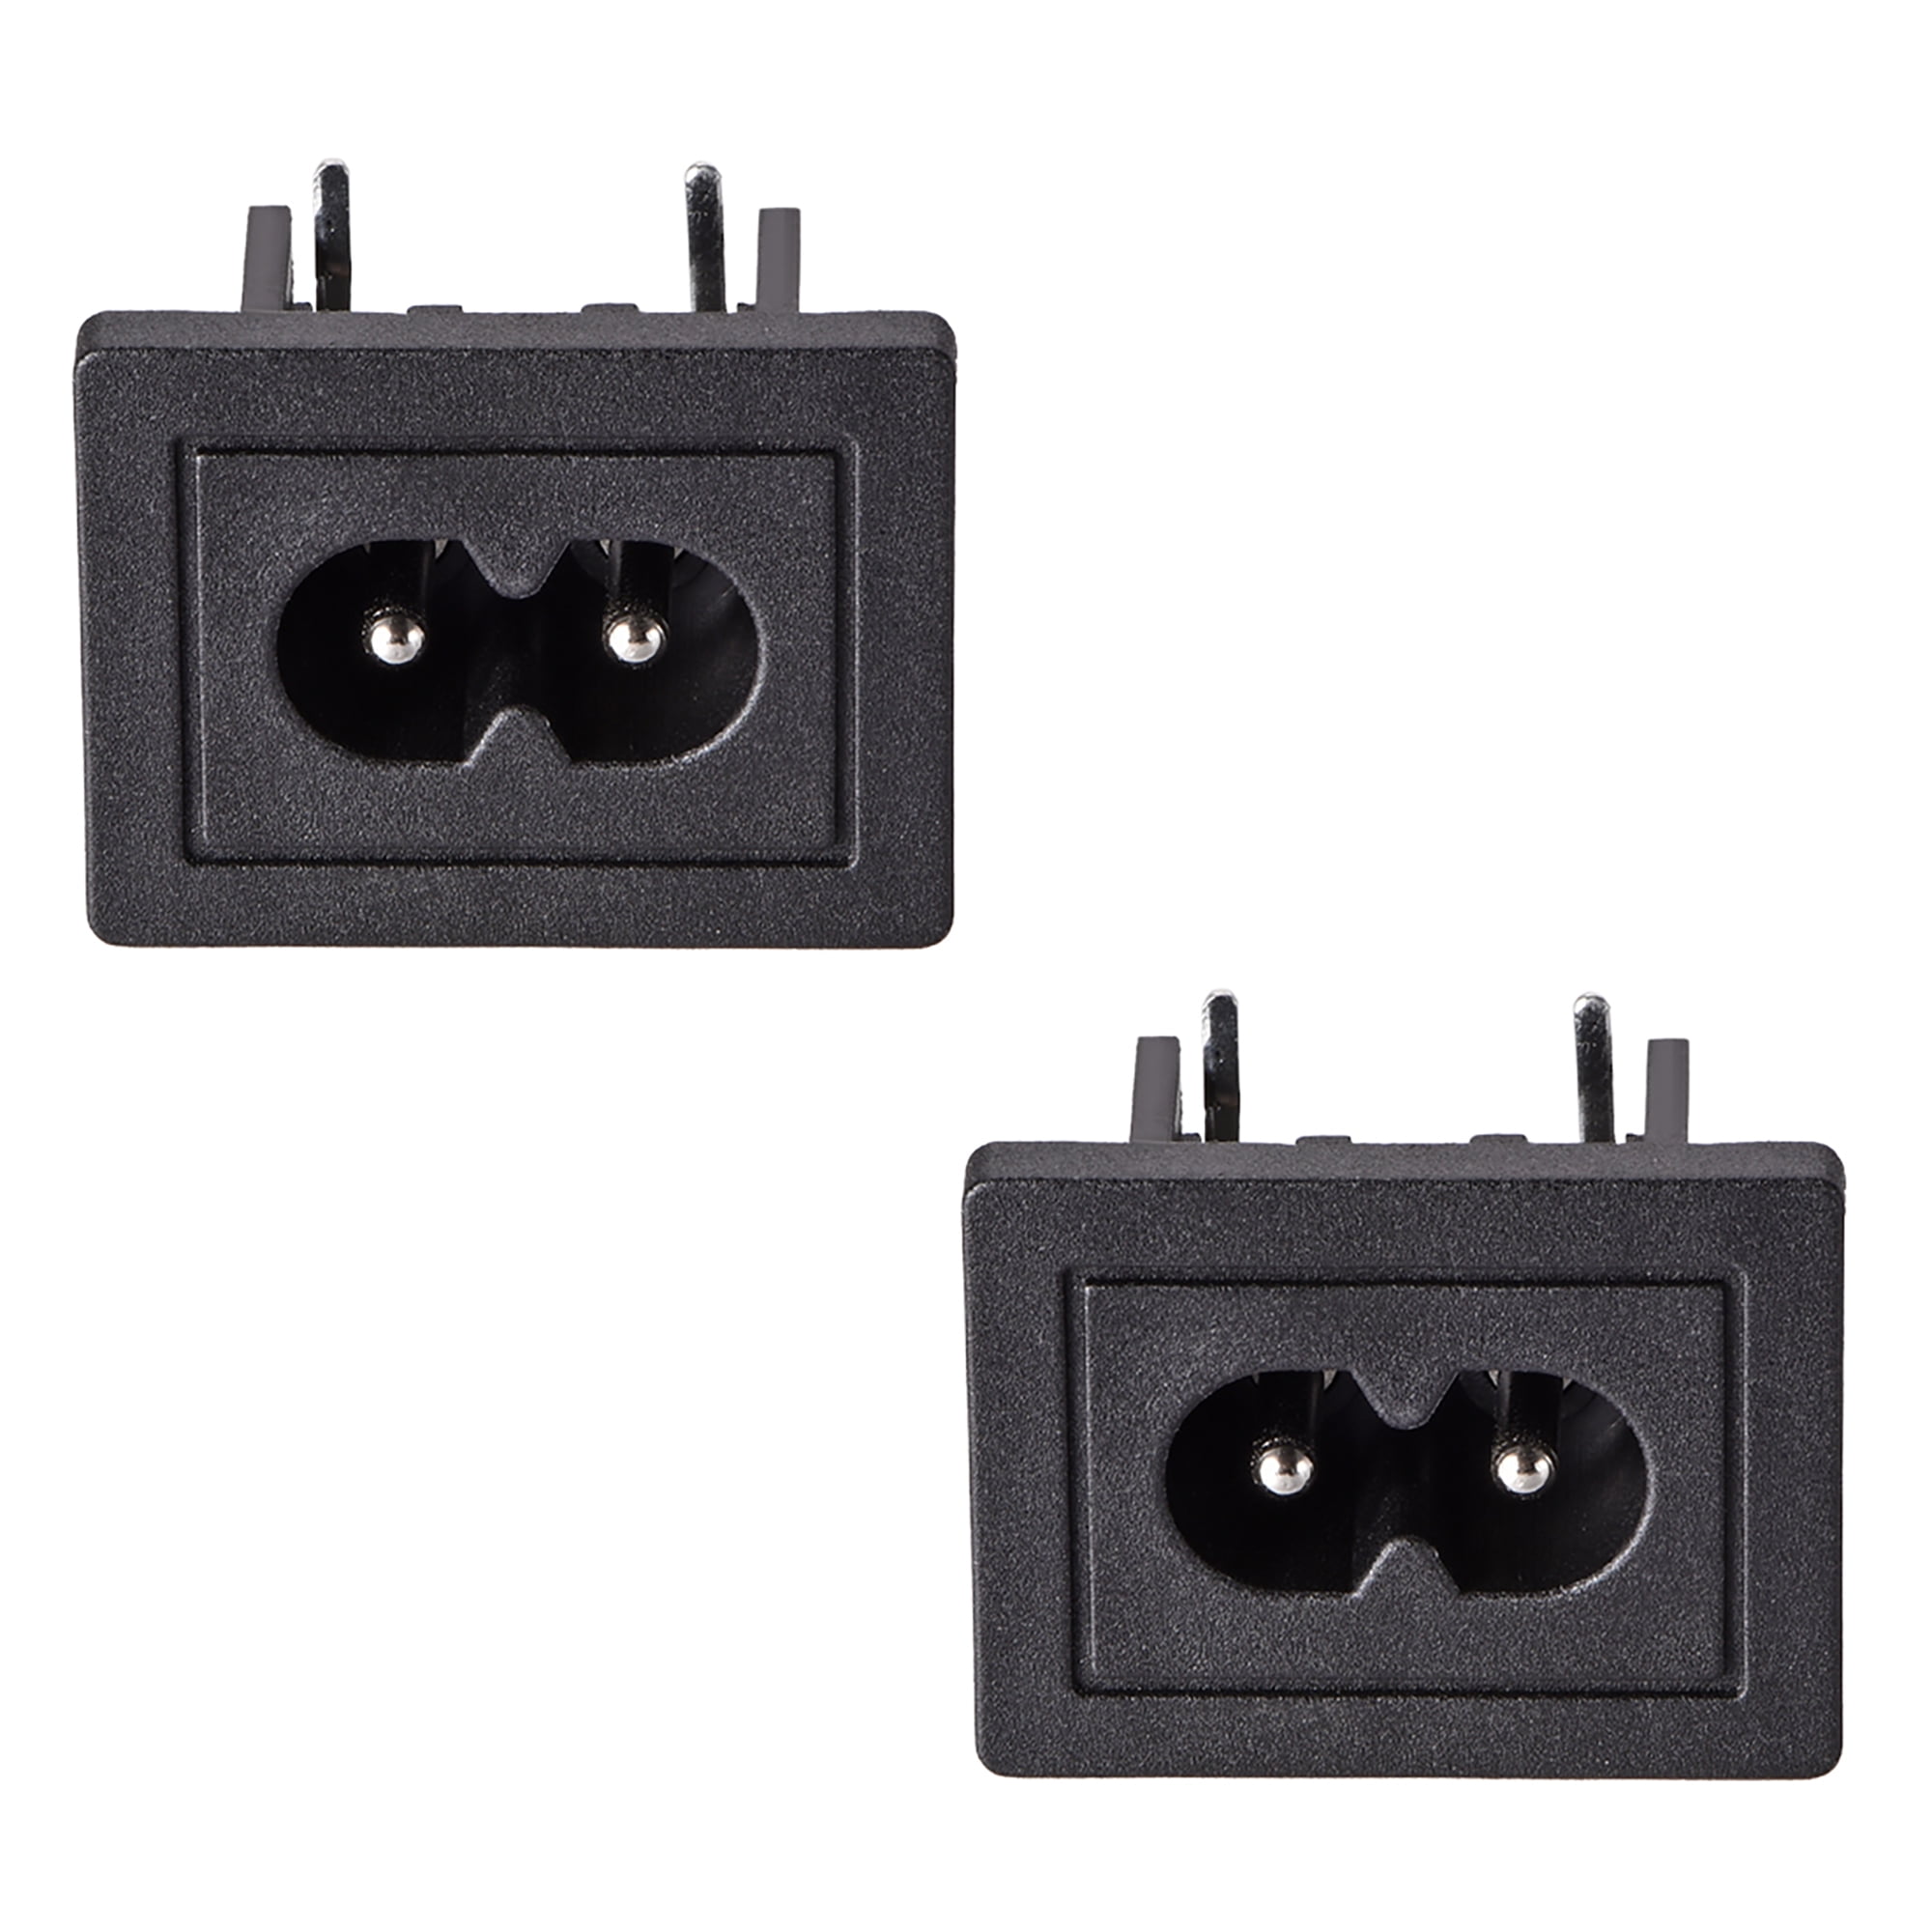 C8 Panel Mount Plug Adapter AC 250V 2.5A 2 Pins IEC Inlet Module Plug Power  Connector Socket Right Angle 2 pcs